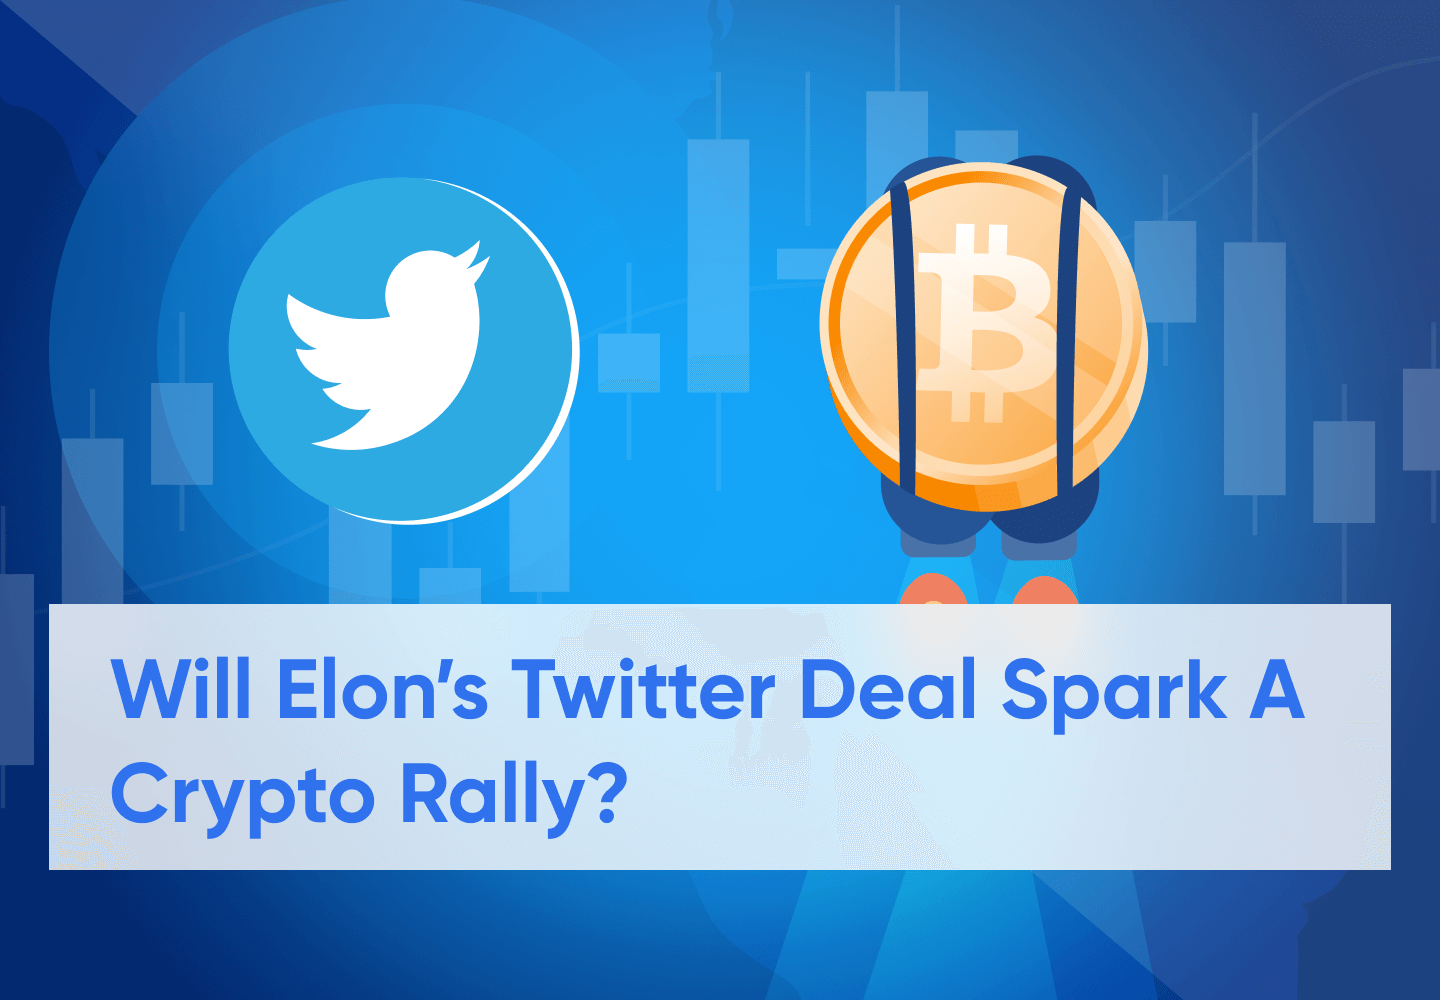 Elon’s Twitter Deal Could Benefit Dogecoin, BNB, Bitcoin, Ethereum and Mask